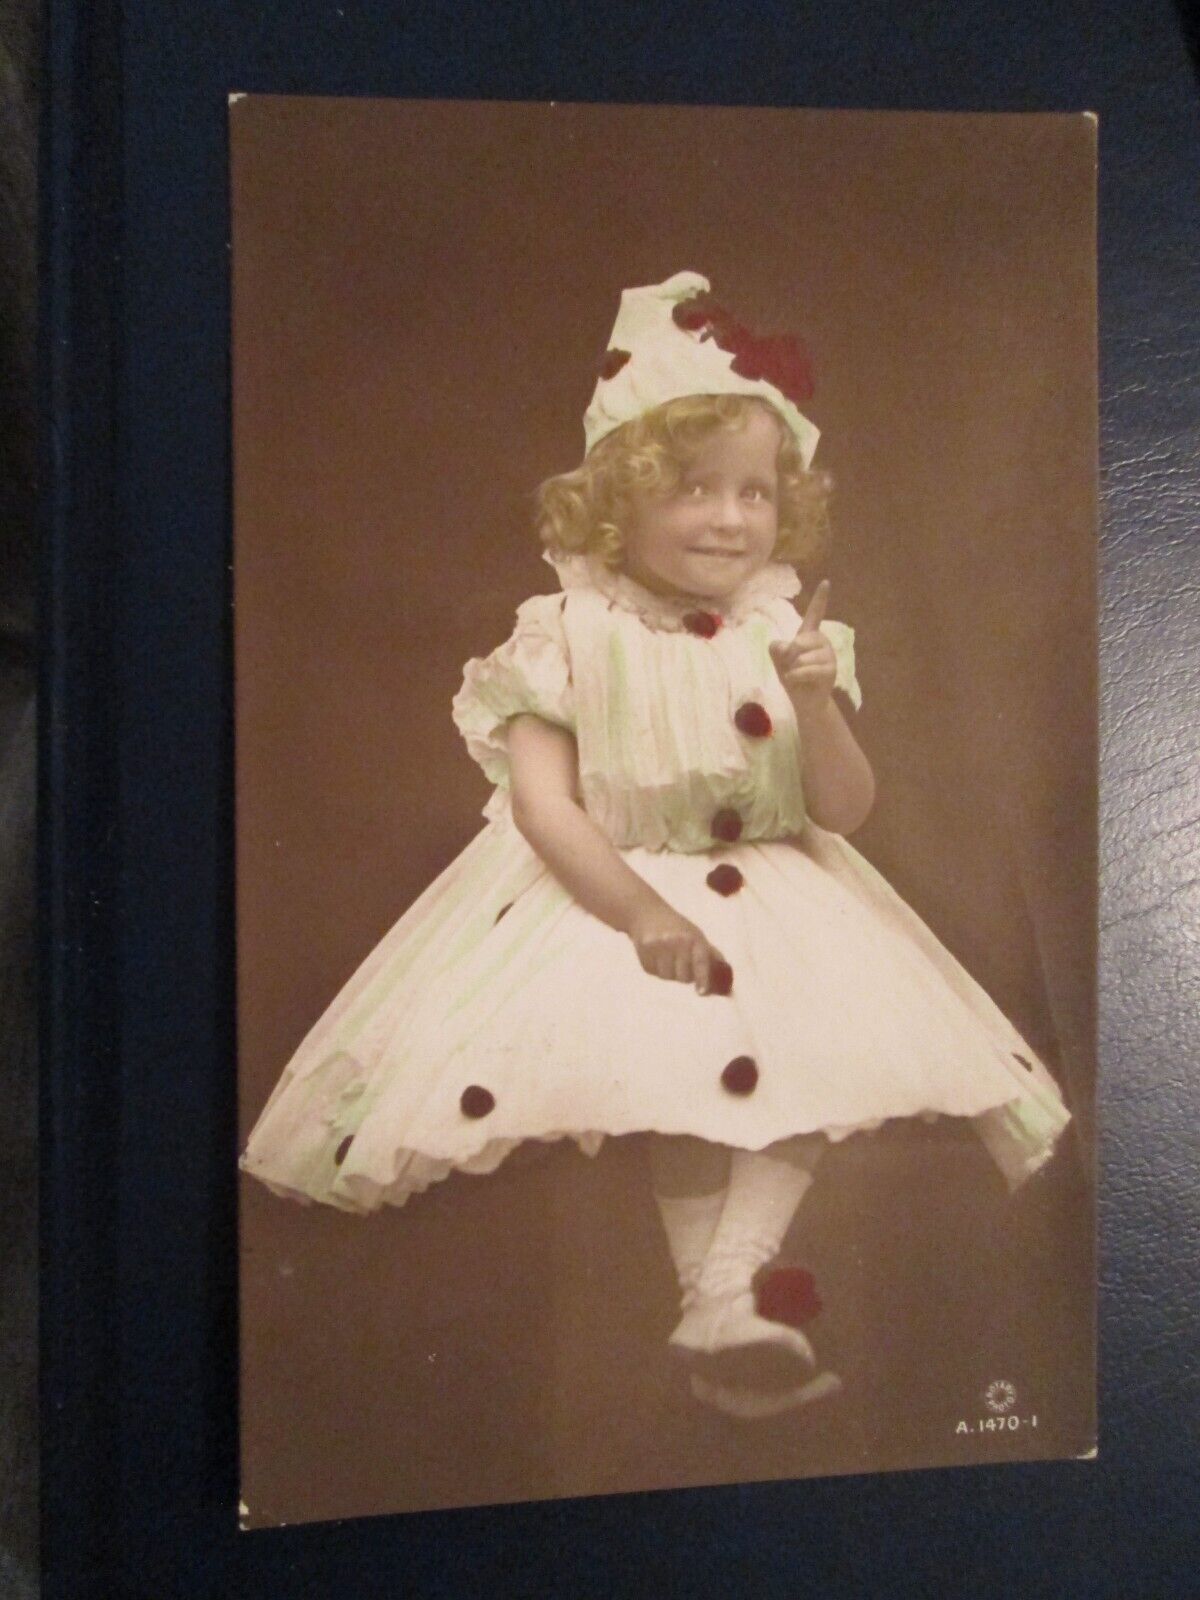 House Clearance - Service of Child as clown or Pierrot, Handpainted RP (posted)